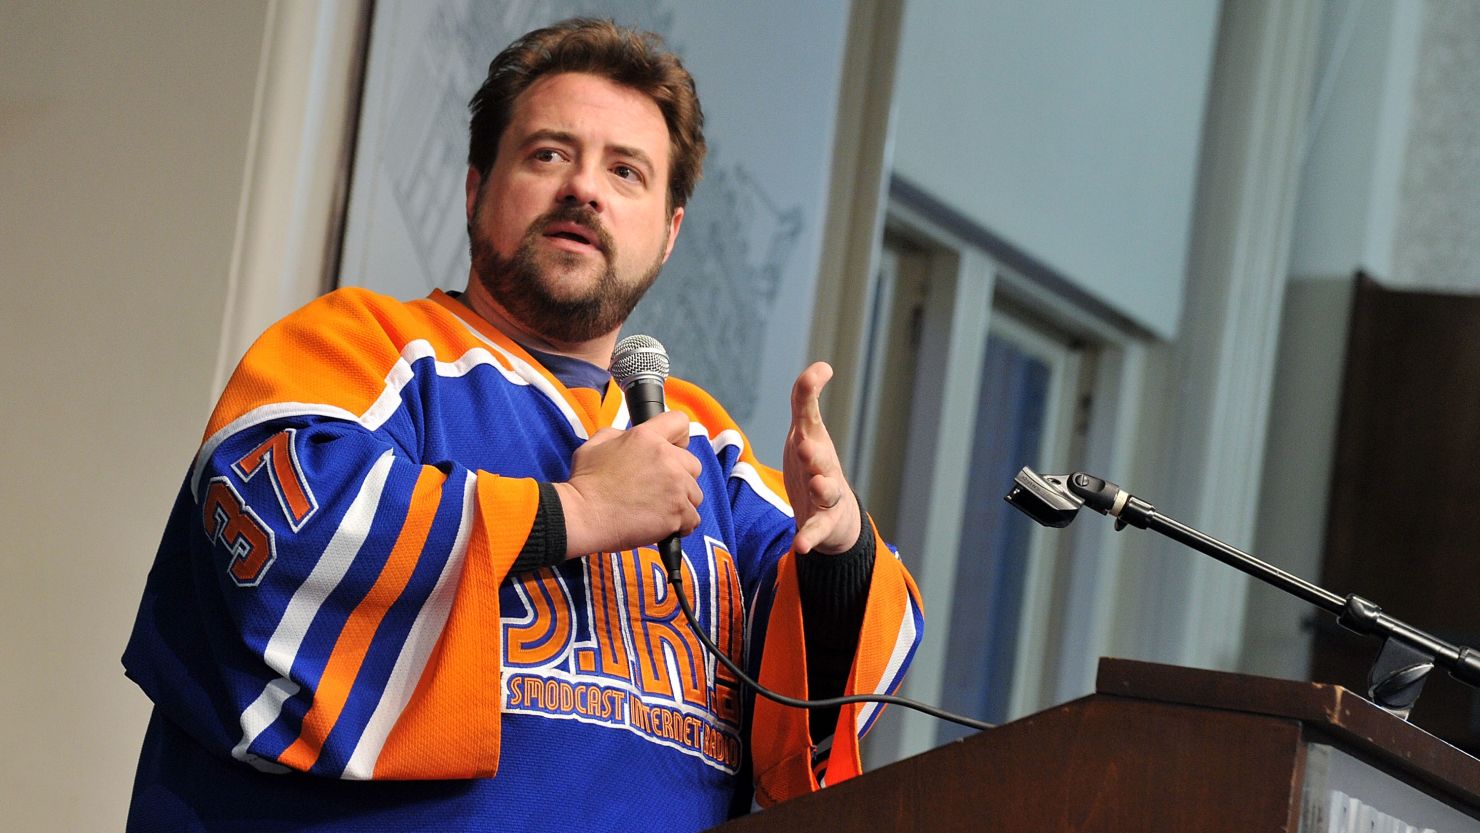 Kevin Smith has nailed down financing and will start filming "Clerks III" next year.